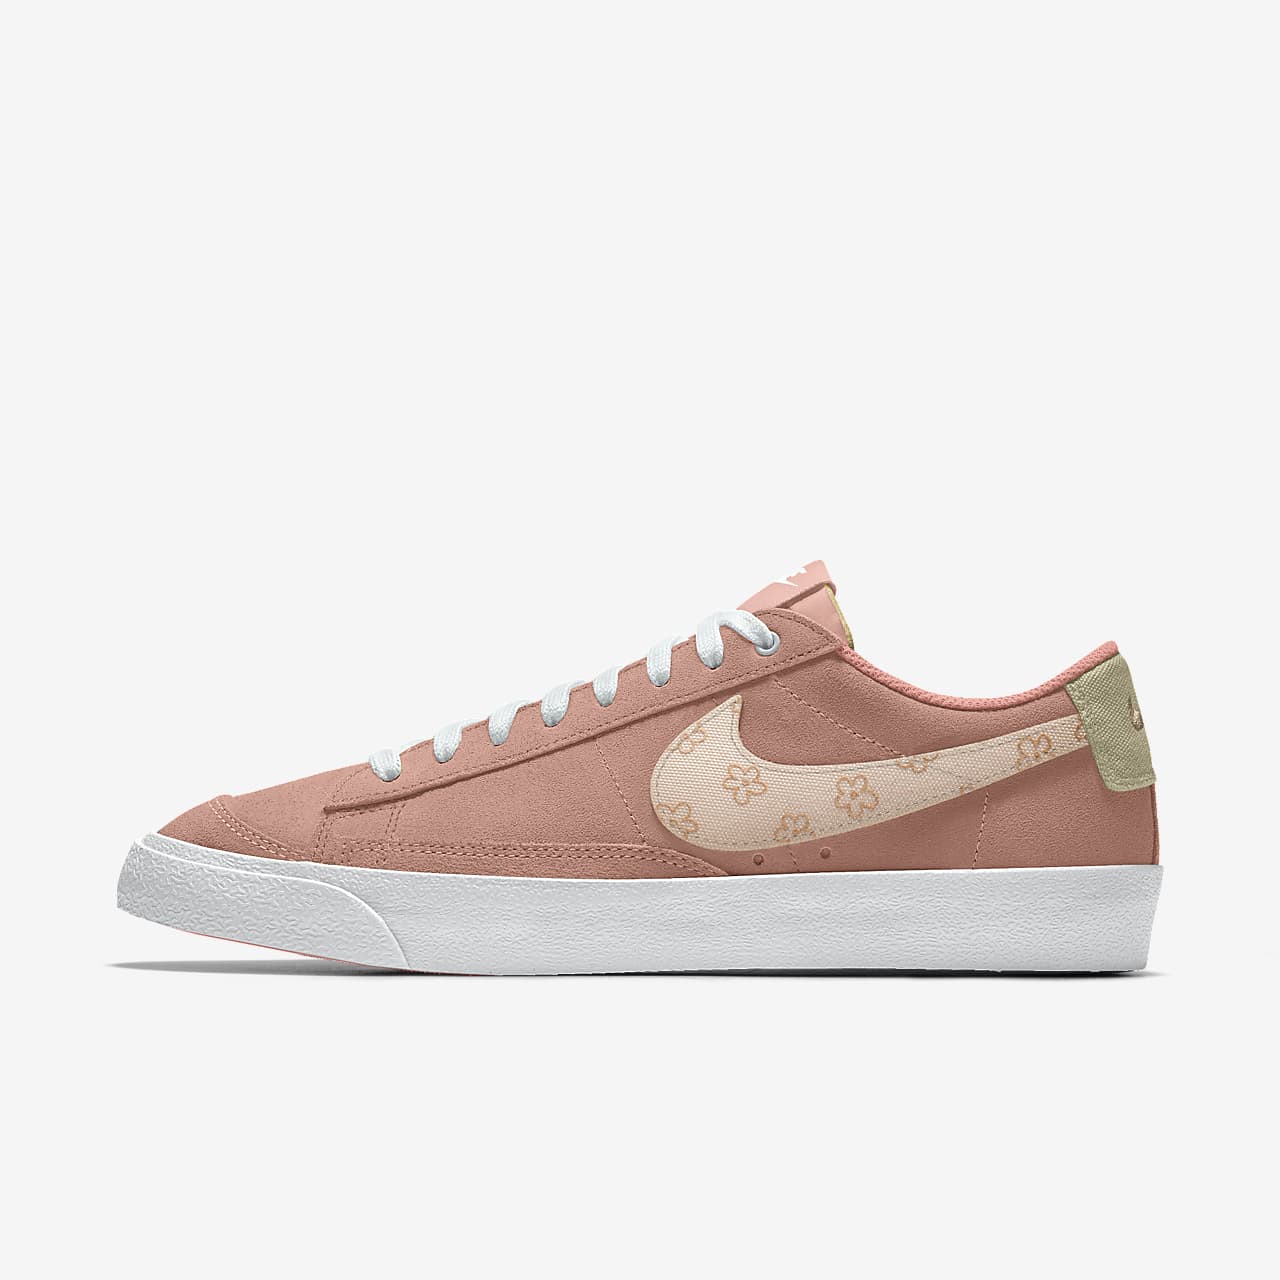 Chaussure personnalisable Nike Blazer Low '77 By You pour Homme